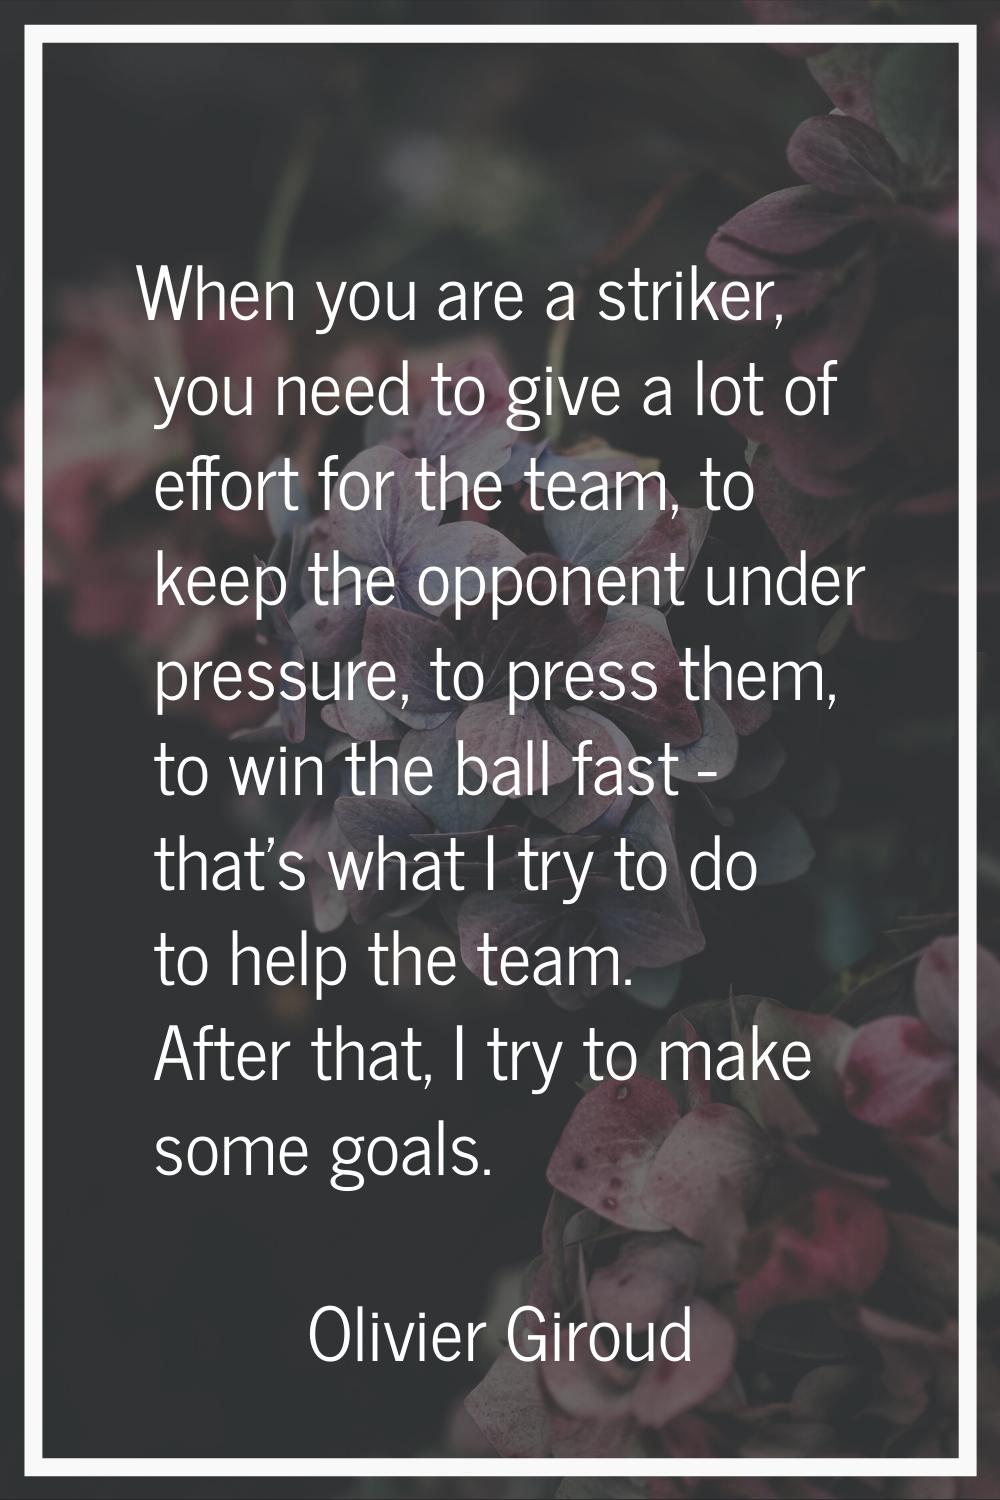 When you are a striker, you need to give a lot of effort for the team, to keep the opponent under p